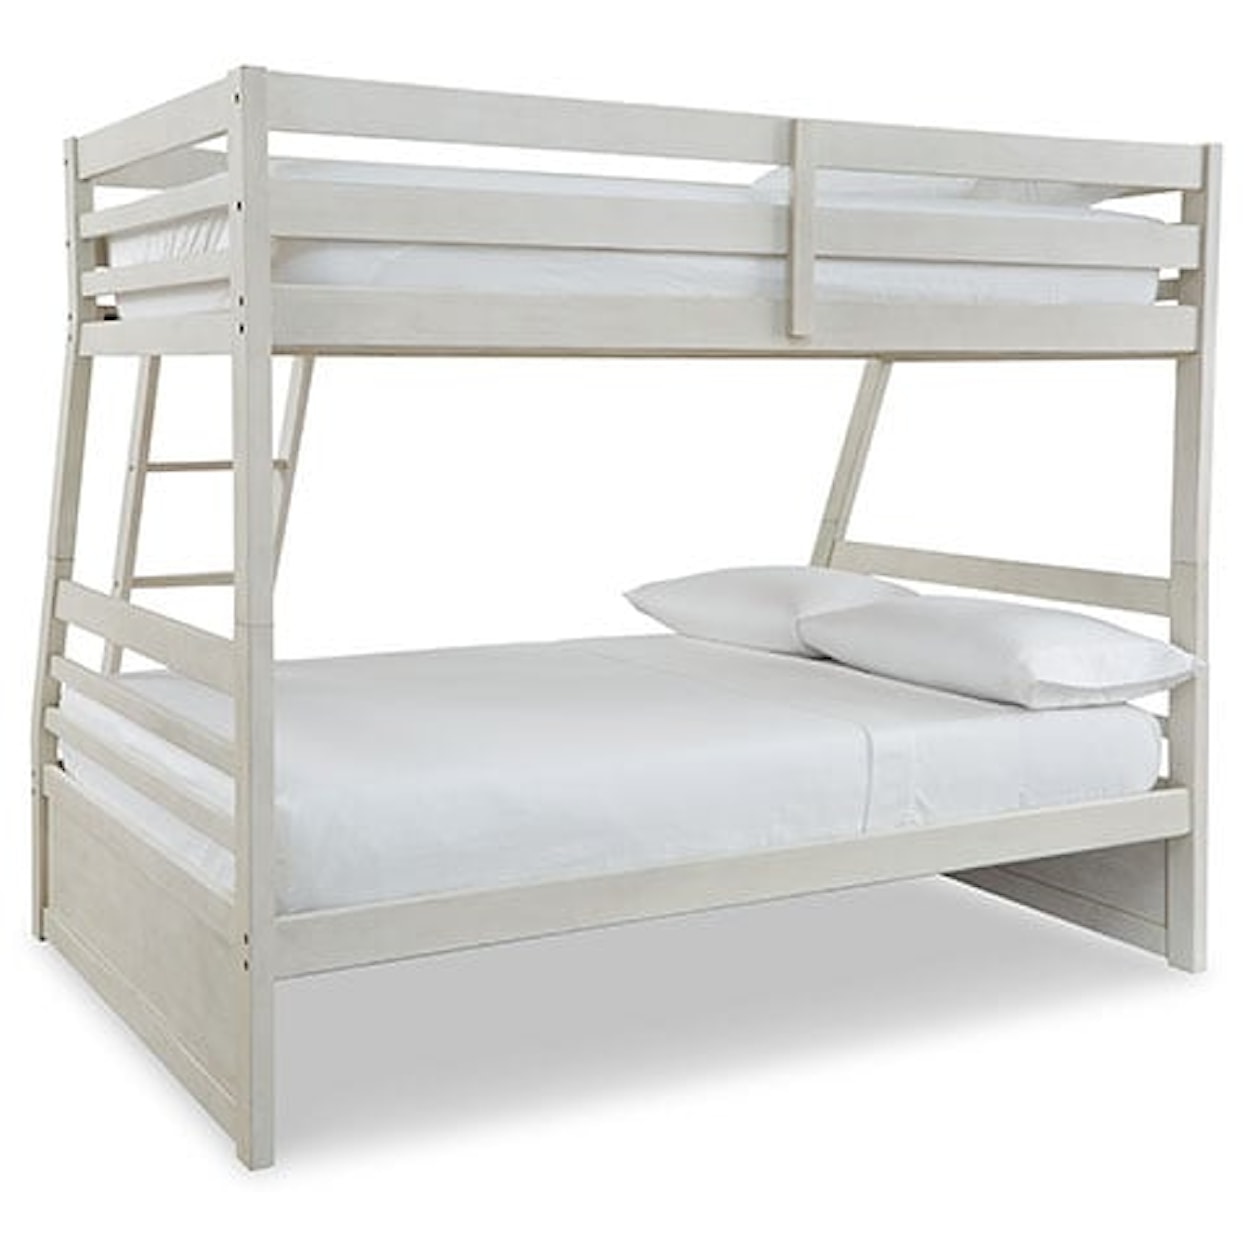 Signature Design by Ashley Furniture Robbinsdale Twin/Full Bunk Bed